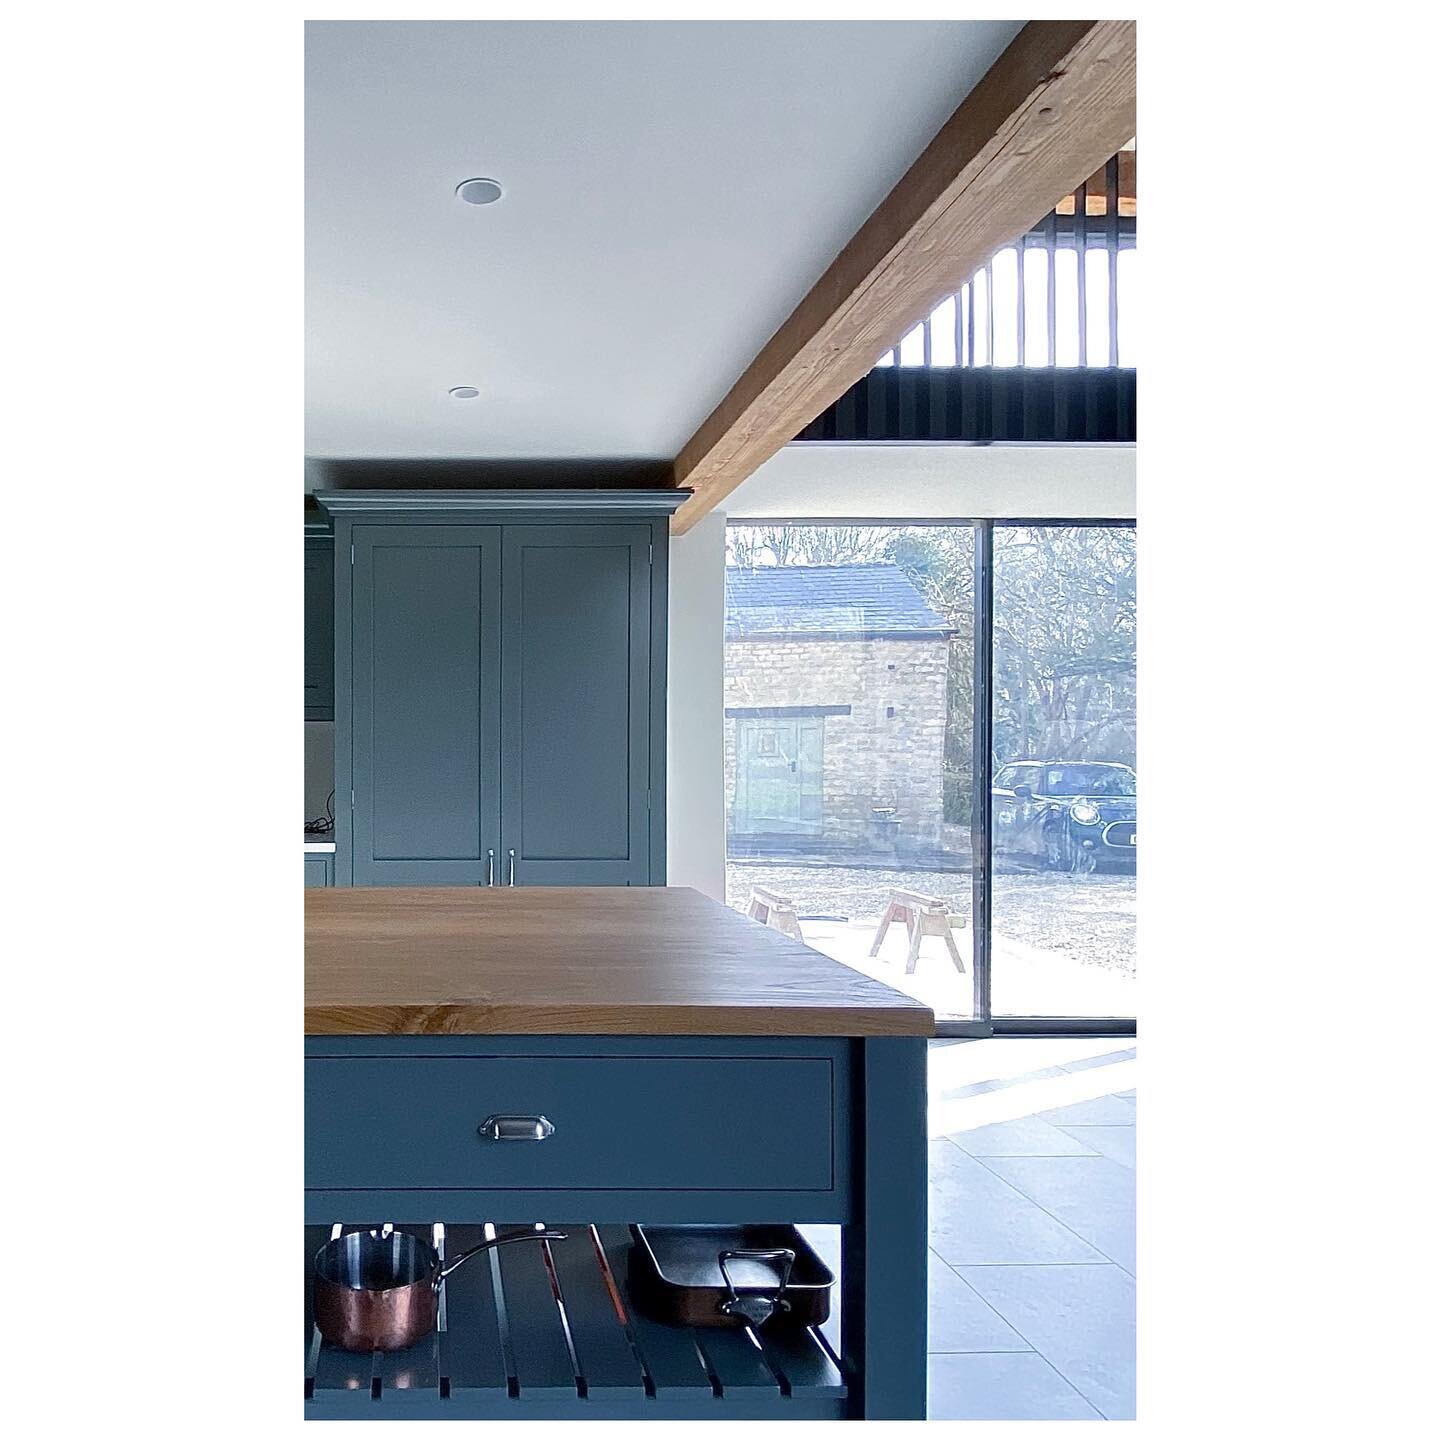 The Watermill kitchen on a sunny winter&rsquo;s day..
.
.
.
.
#bespokekitchen #interiordesign #cotswolds #countryliving